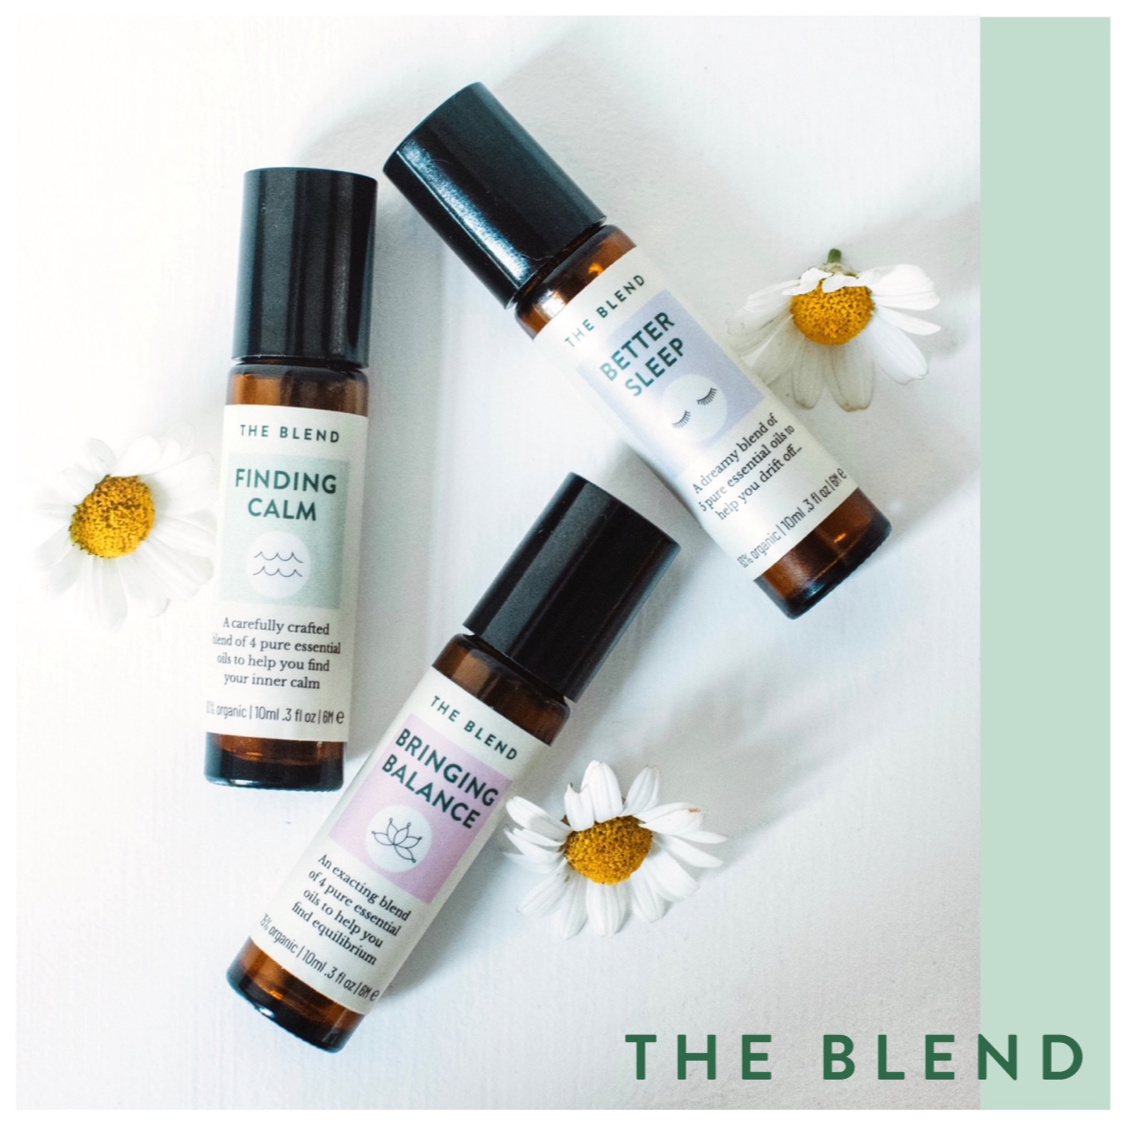 3 packs of essential oils surrounded by chamomile flowers, with The Blend logo